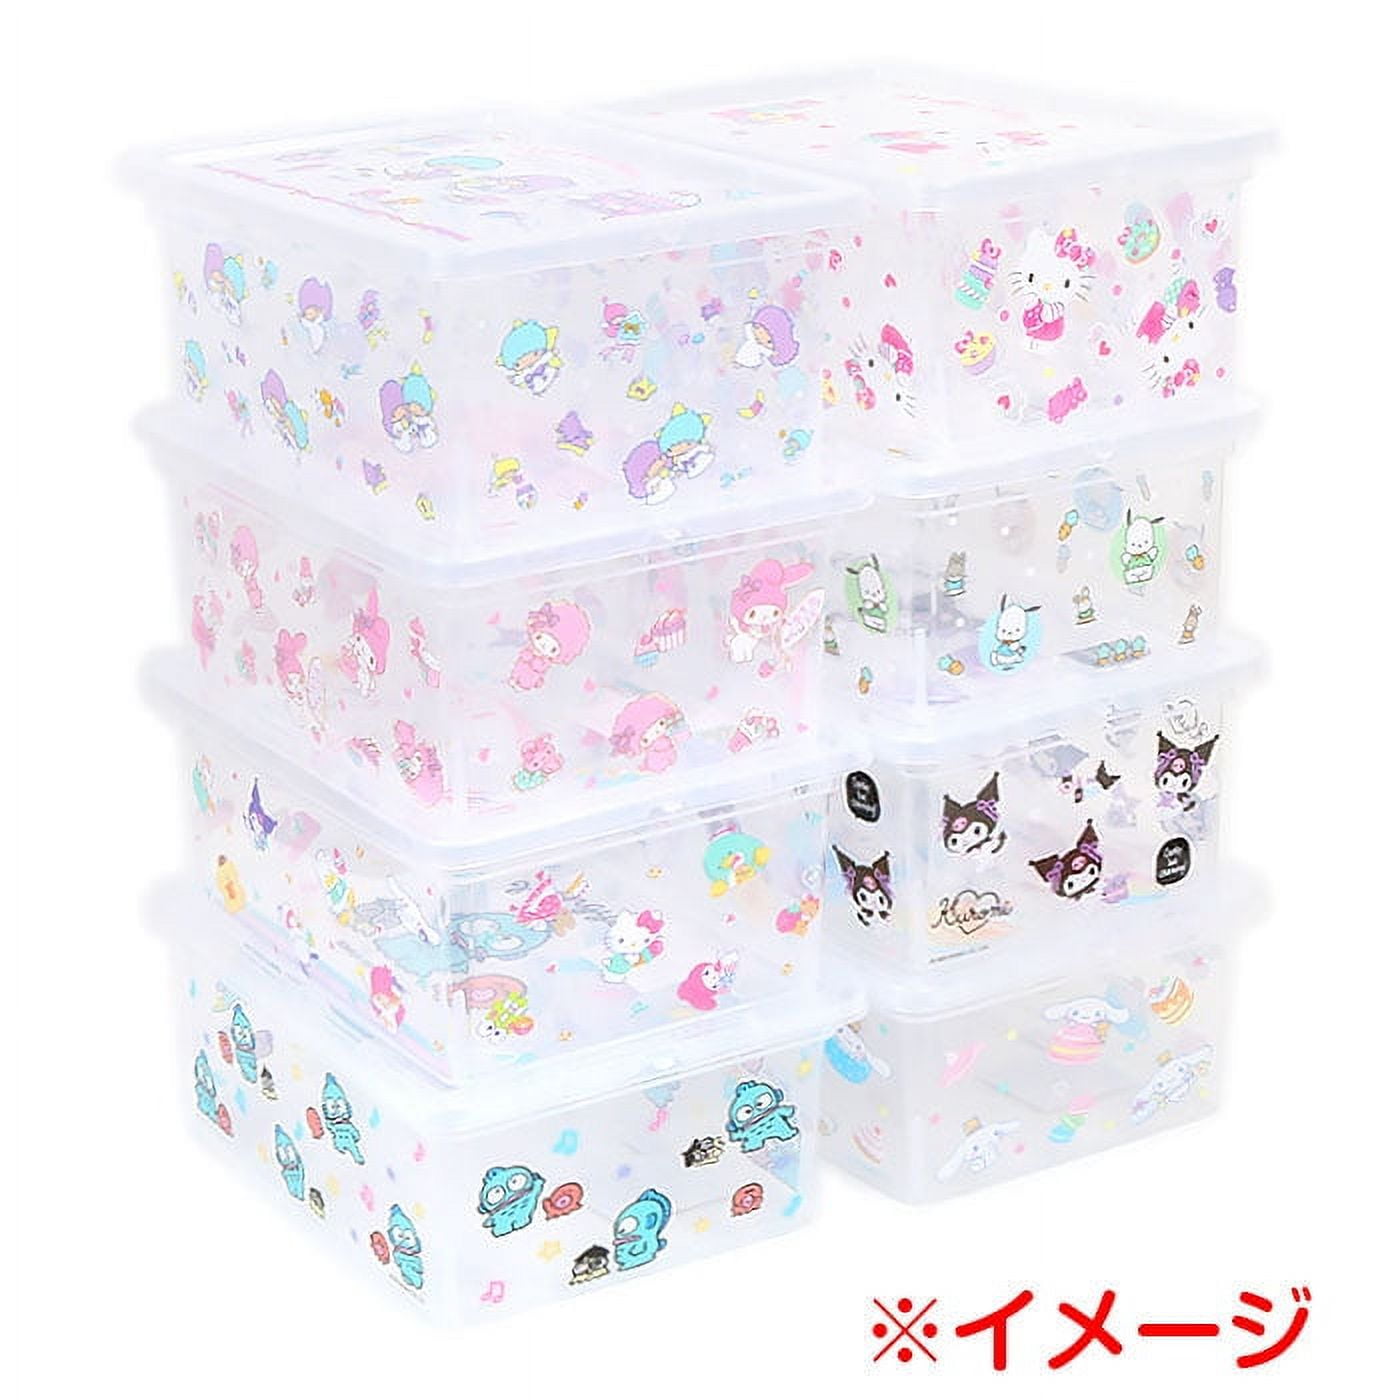 Sanrio Hello Kitty Sanrio Characters Folding storage box with lid From Japan